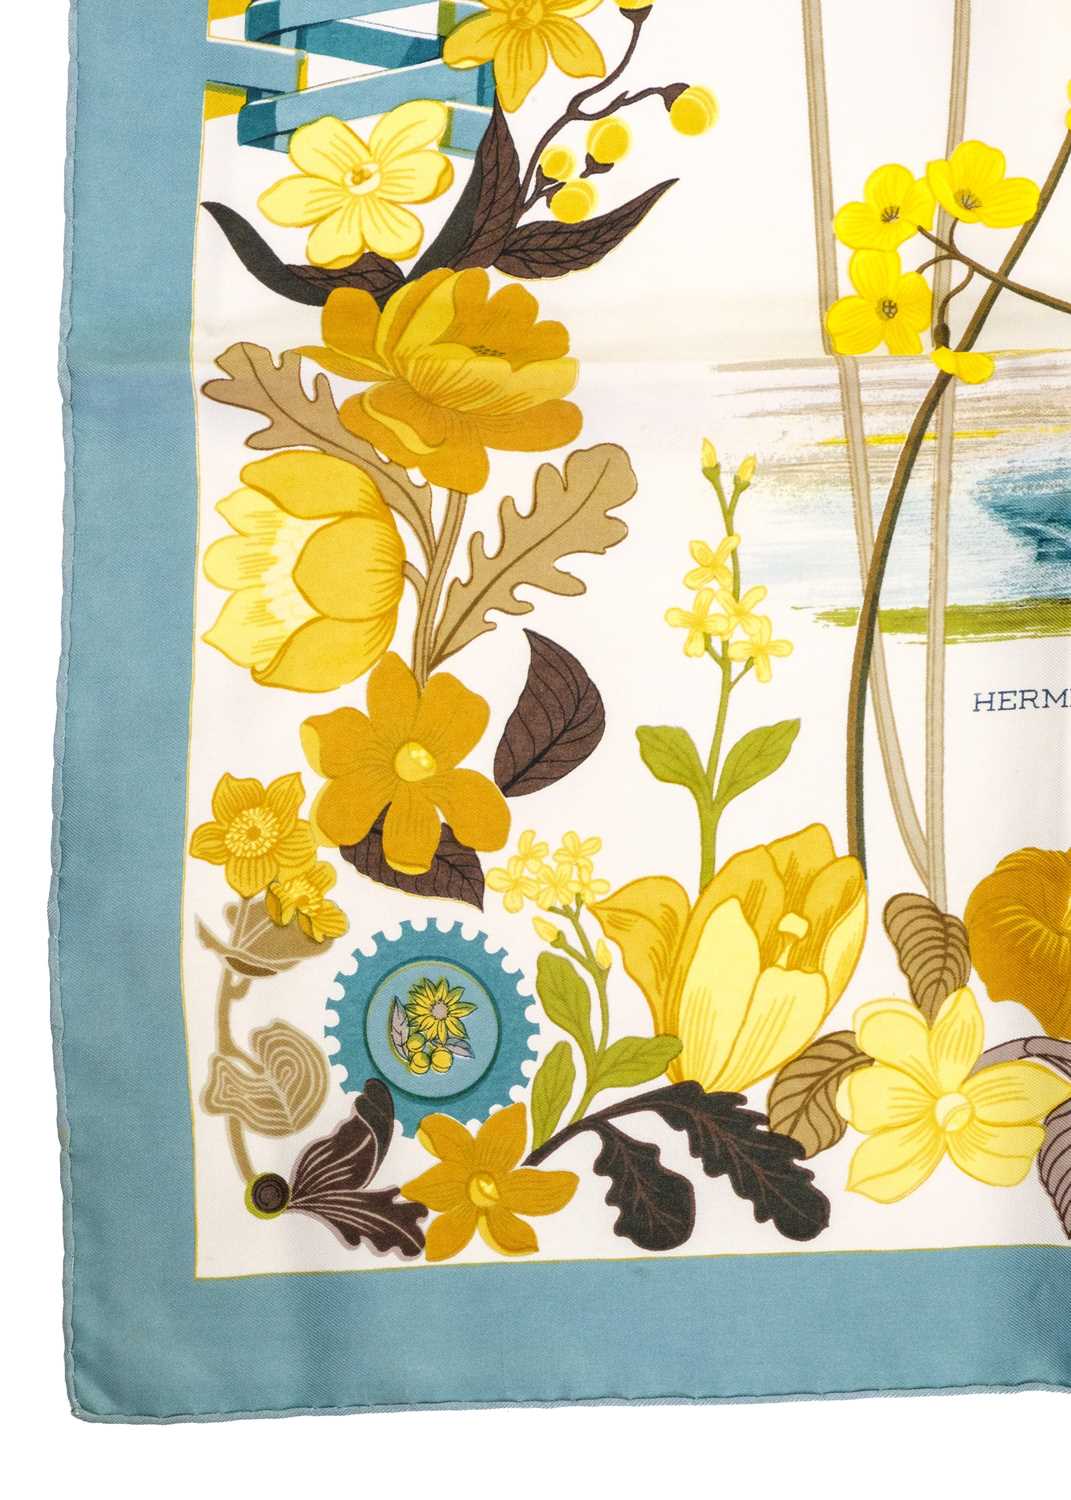 HERMES - A printed silk scarf 'Les Bolides'. - Image 5 of 7